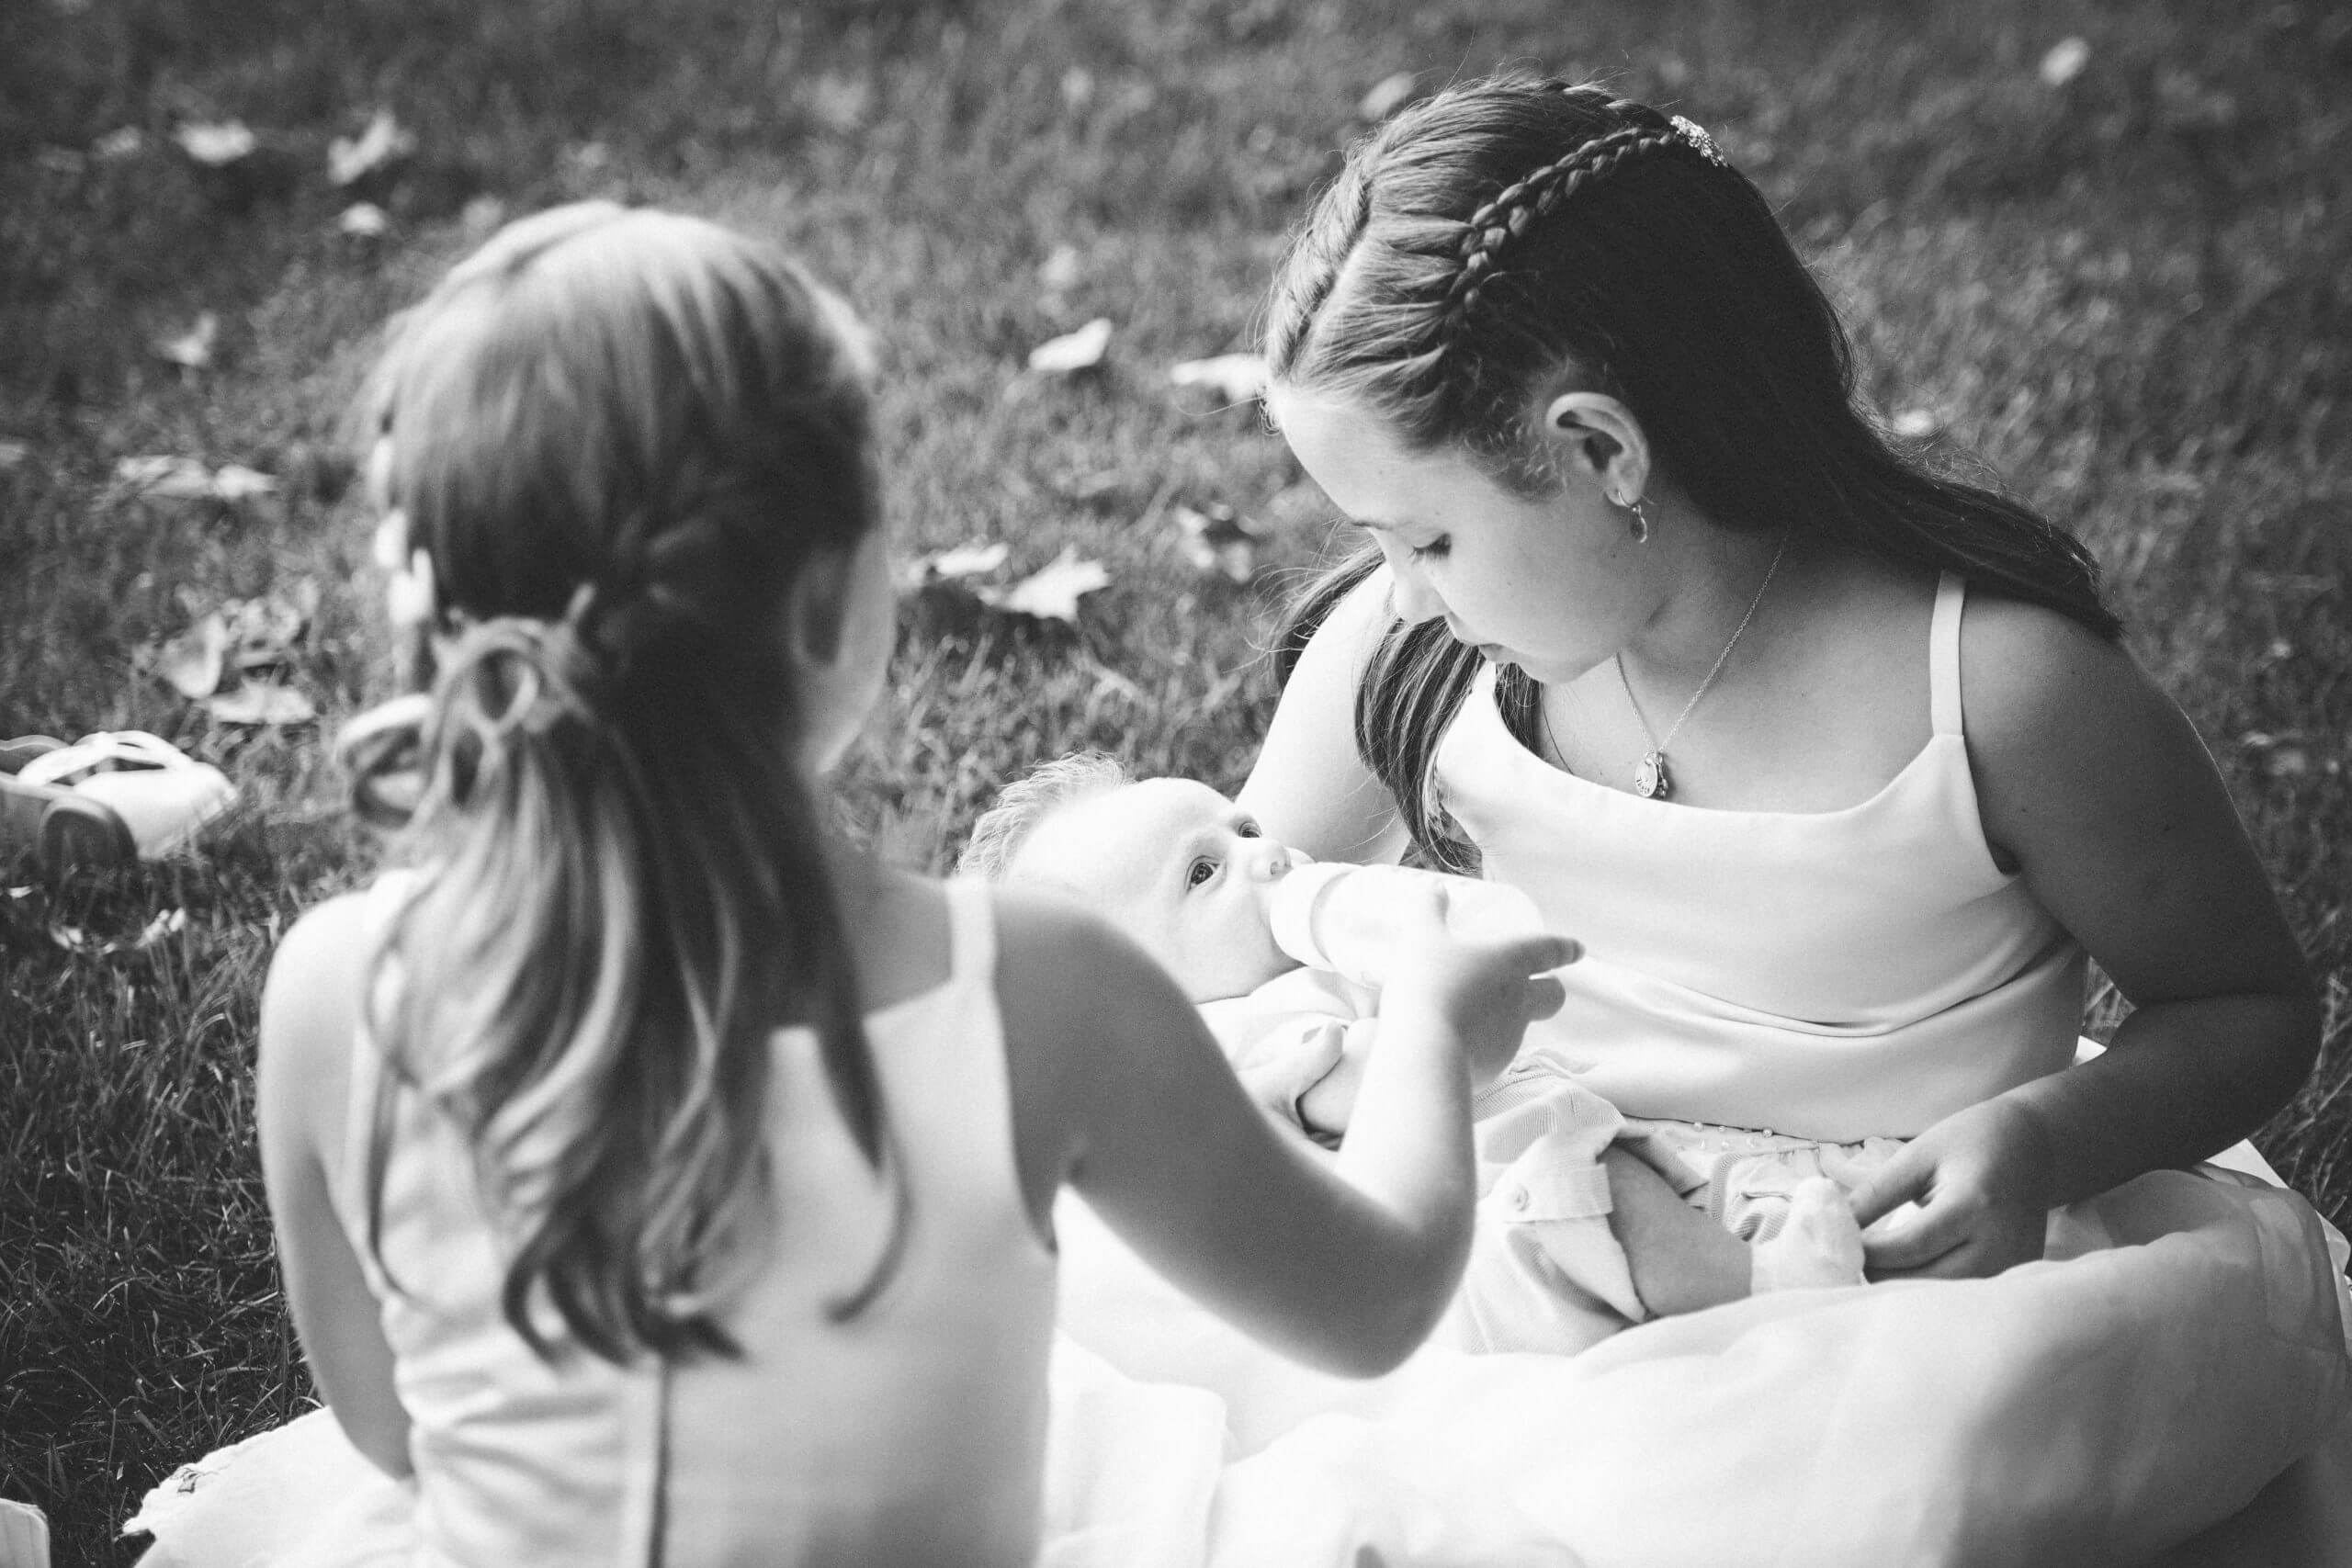 Black and white image of two young girls in pretty dresses. One little white girl is holding a baby in her lap, another little white girl is holding the bottle for the little white baby in the lap of the other girl.